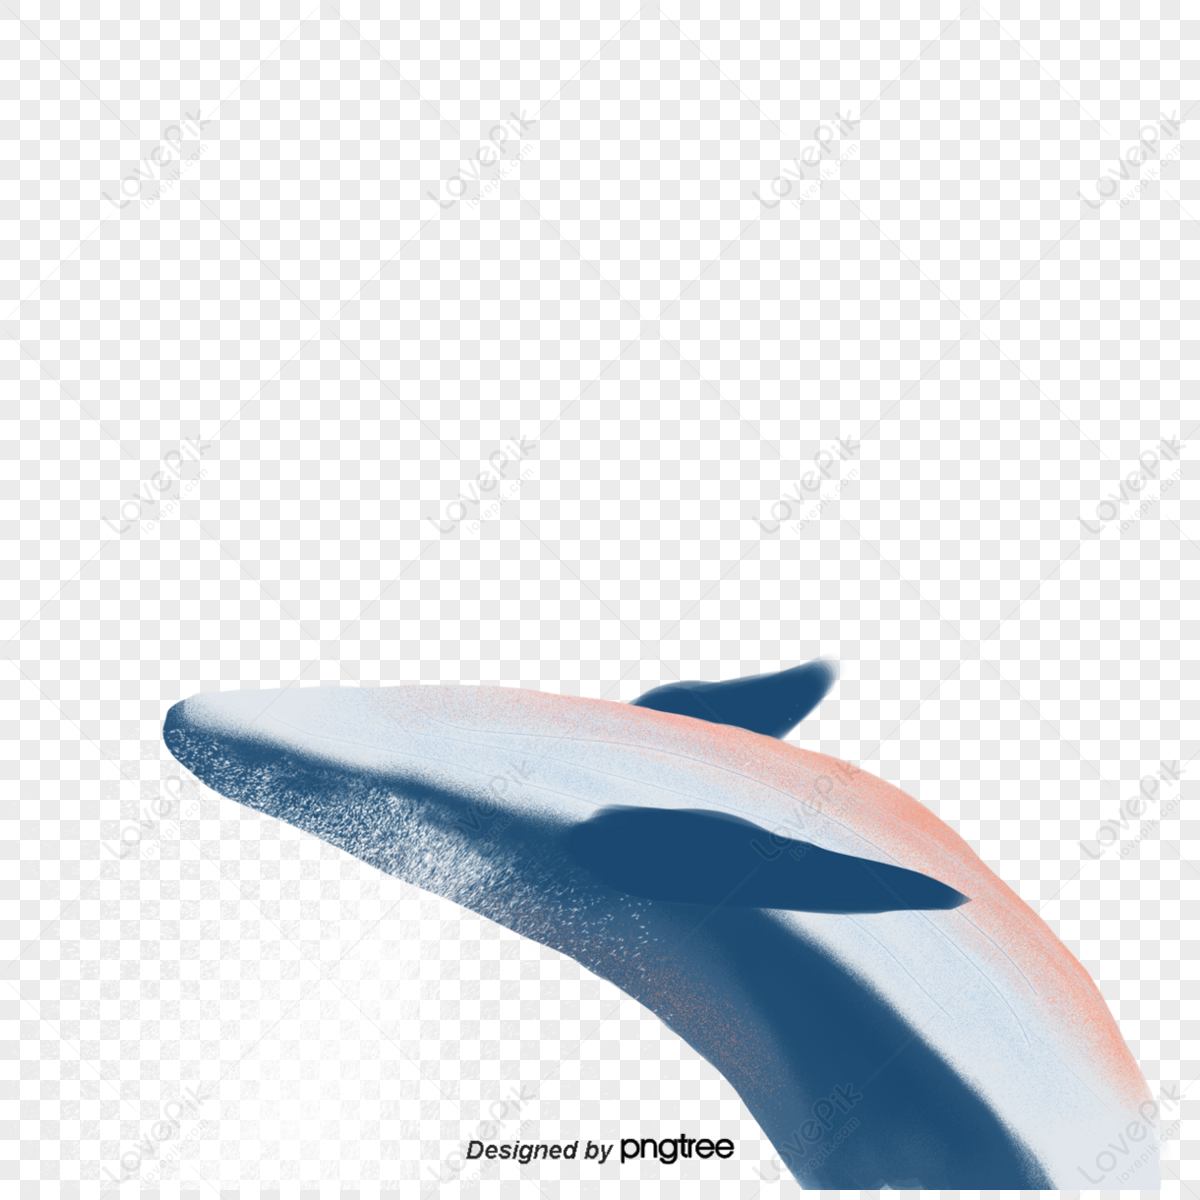 Dolphin Anime Pictures Images, HD Pictures For Free Vectors Download -  Lovepik.com